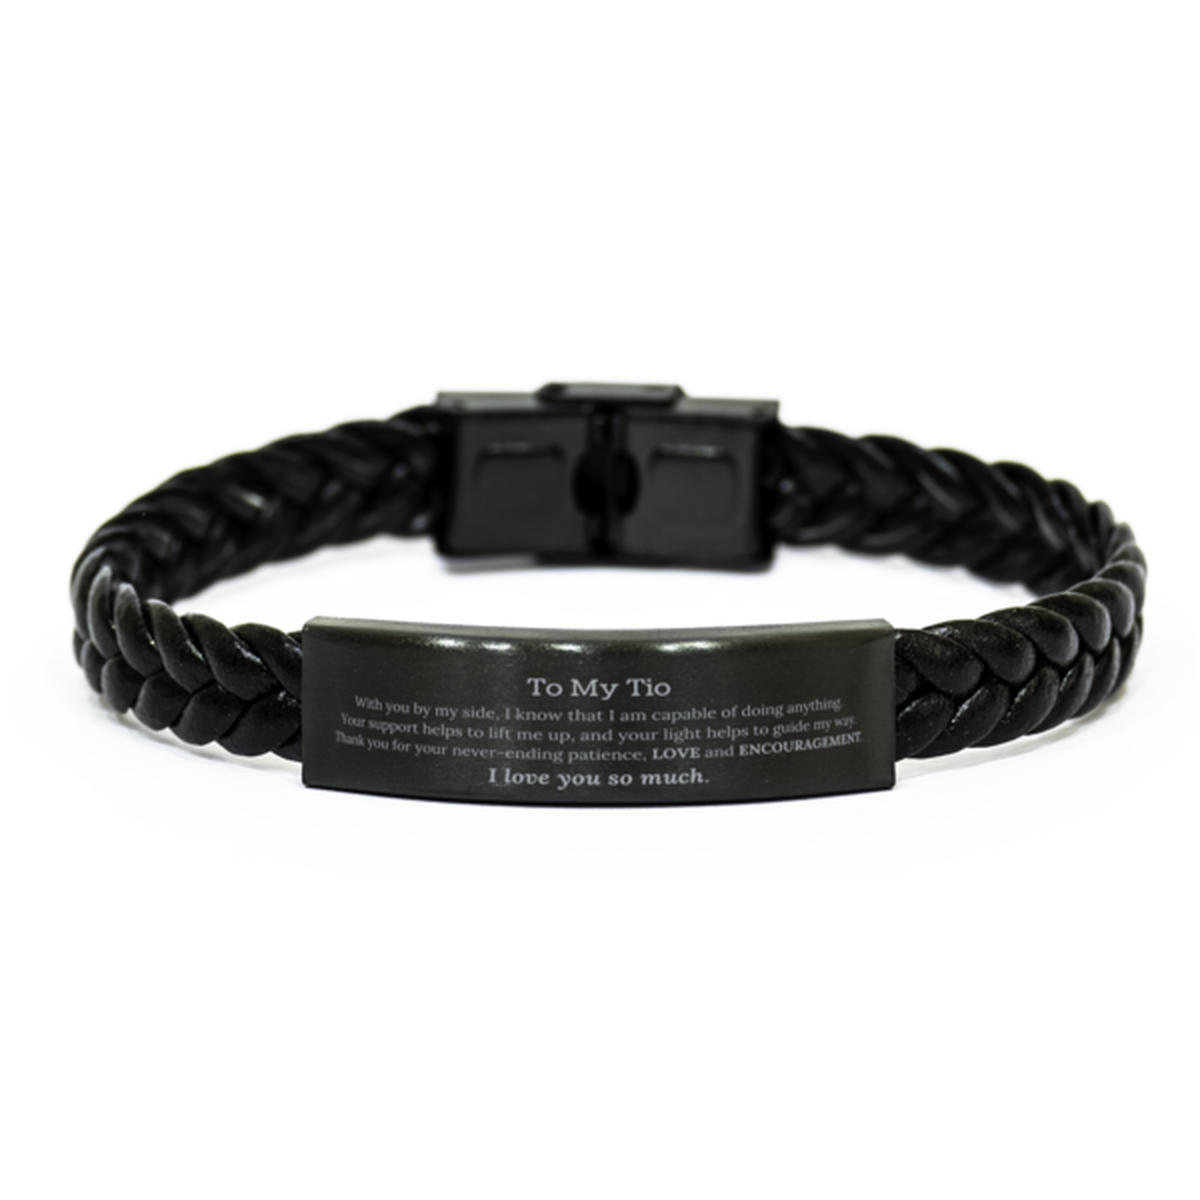 Appreciation Tio Braided Leather Bracelet Gifts, To My Tio Birthday Christmas Wedding Keepsake Gifts for Tio With you by my side, I know that I am capable of doing anything. I love you so much